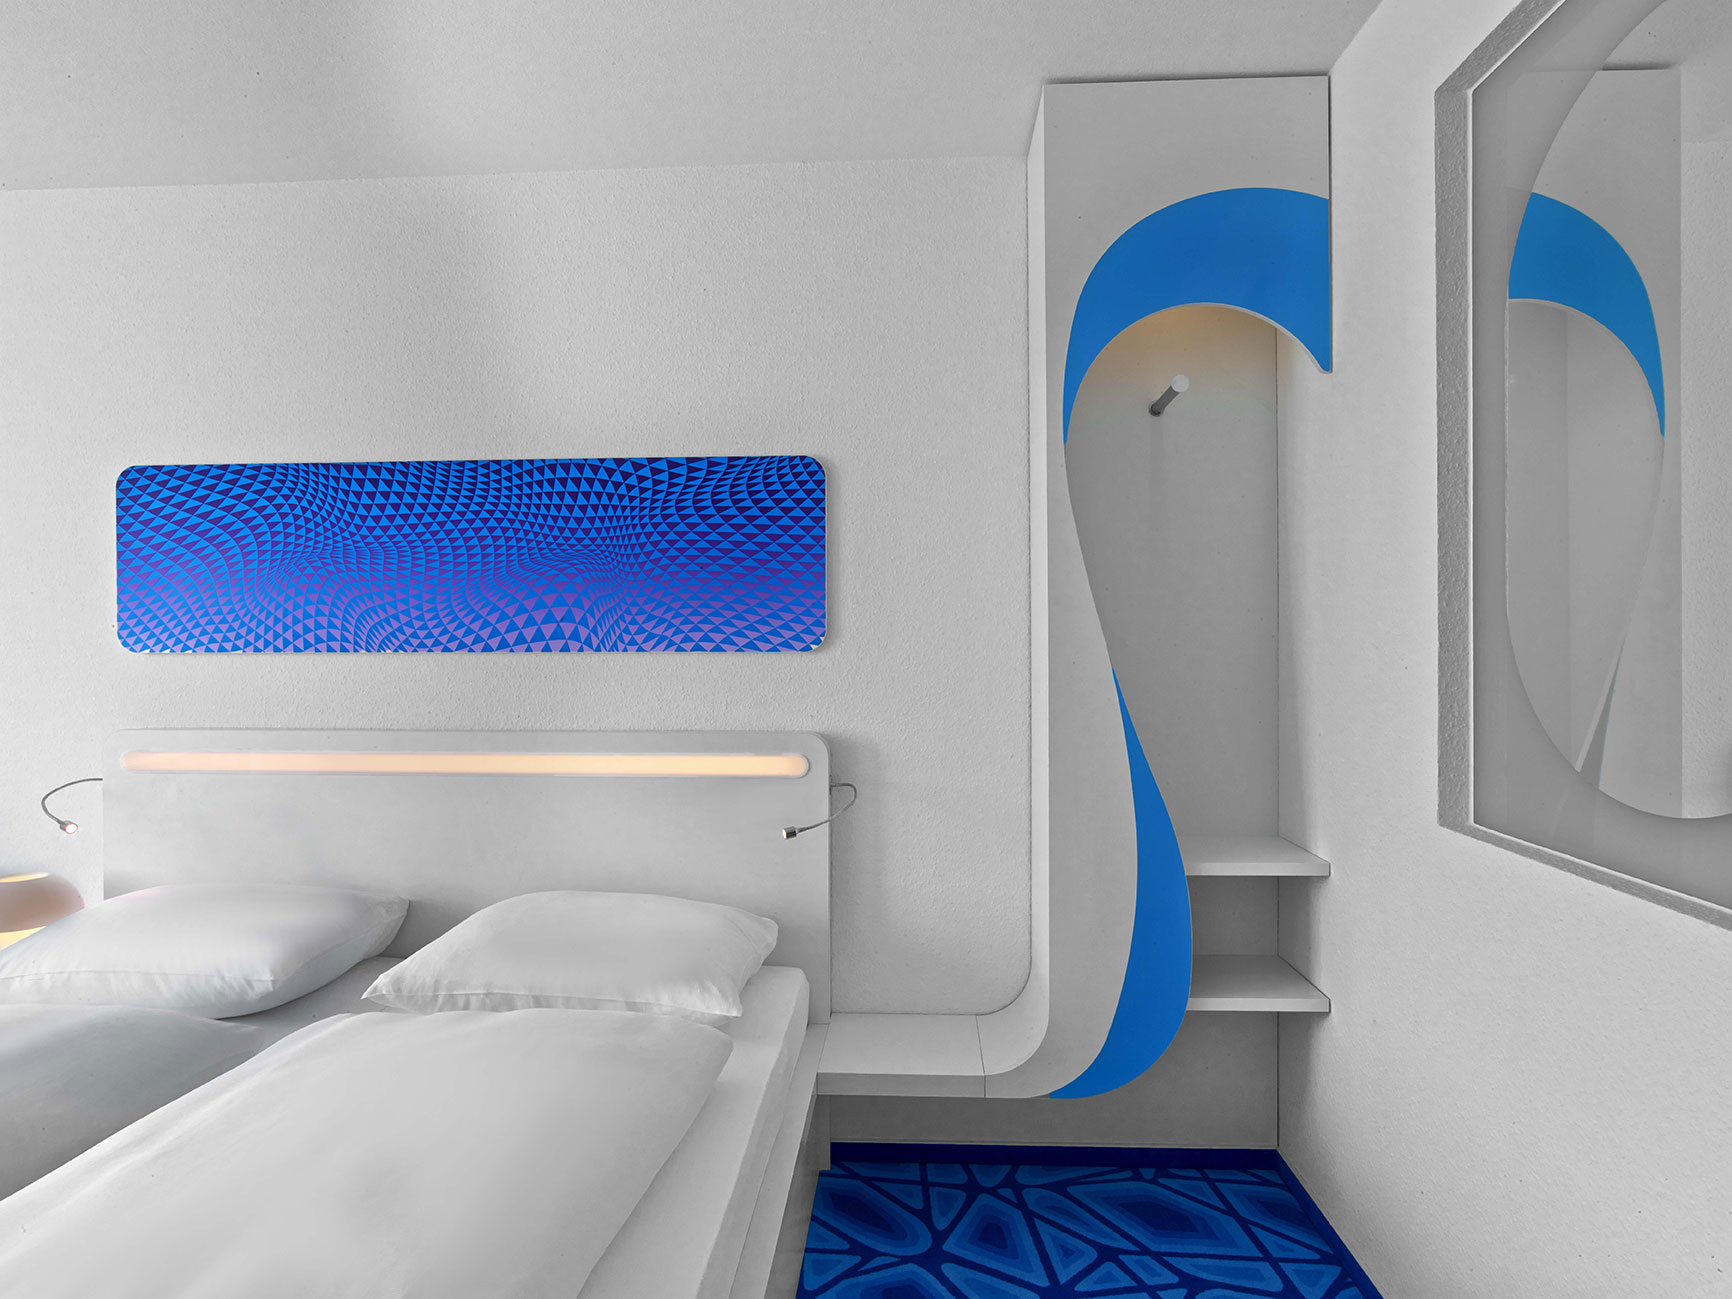 Design hotel room with blue elements, a double bed and an open wardrobe